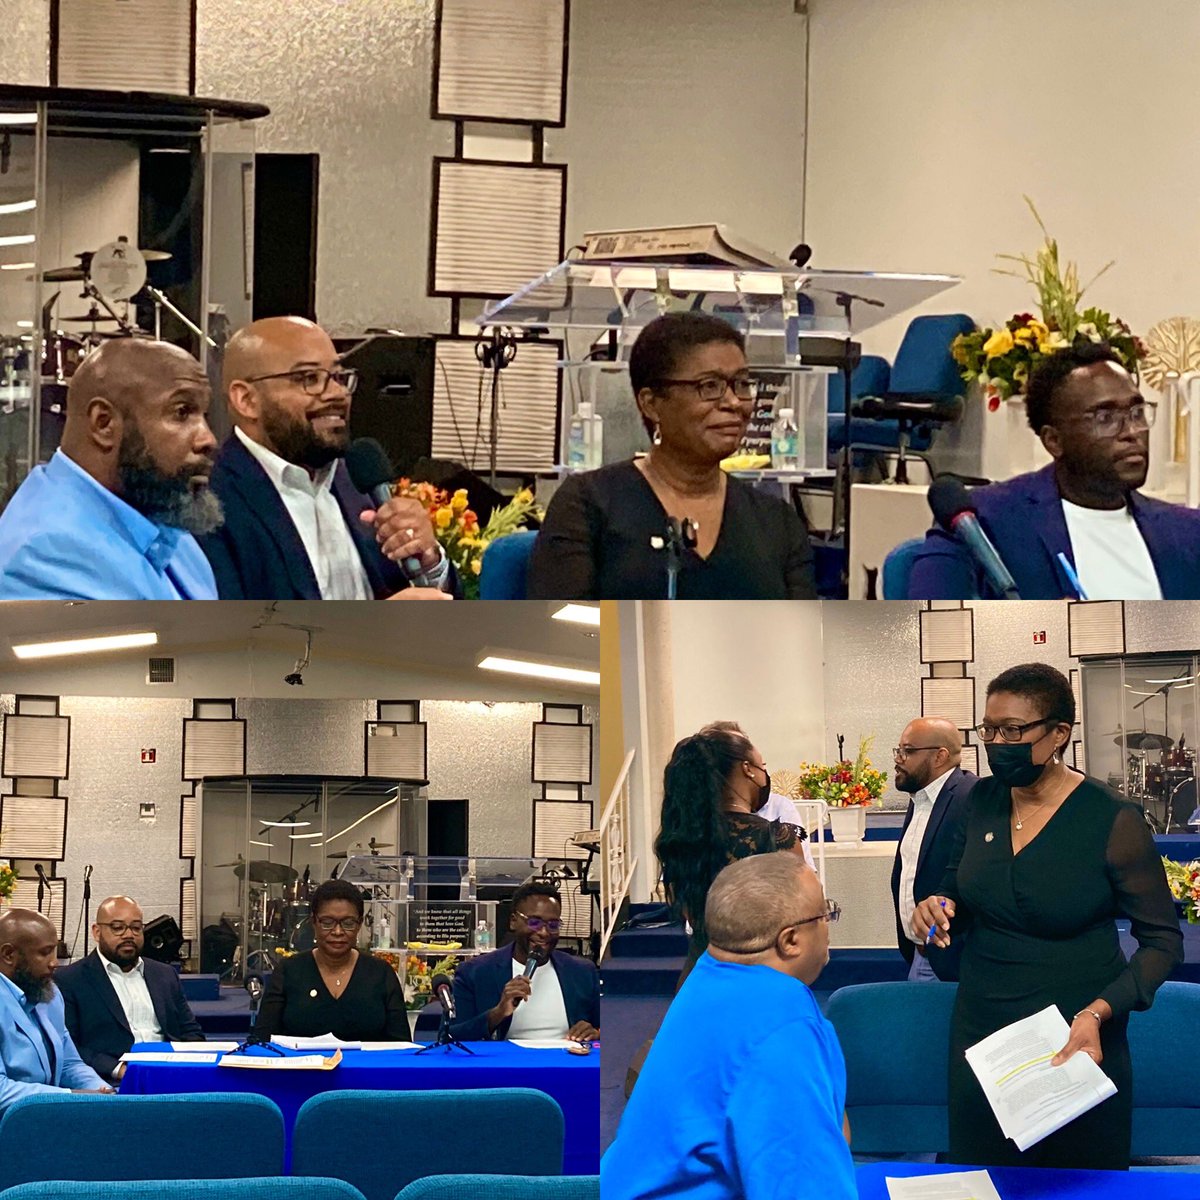 Our sincere thanks to Senator Jones for organizing this forum at Koinonia Church to provide a legislative update to the residents of our community. We came together to keep our residents informed on what went on in Tallahassee and the issues impacting them. 

#LegislativeUpdate